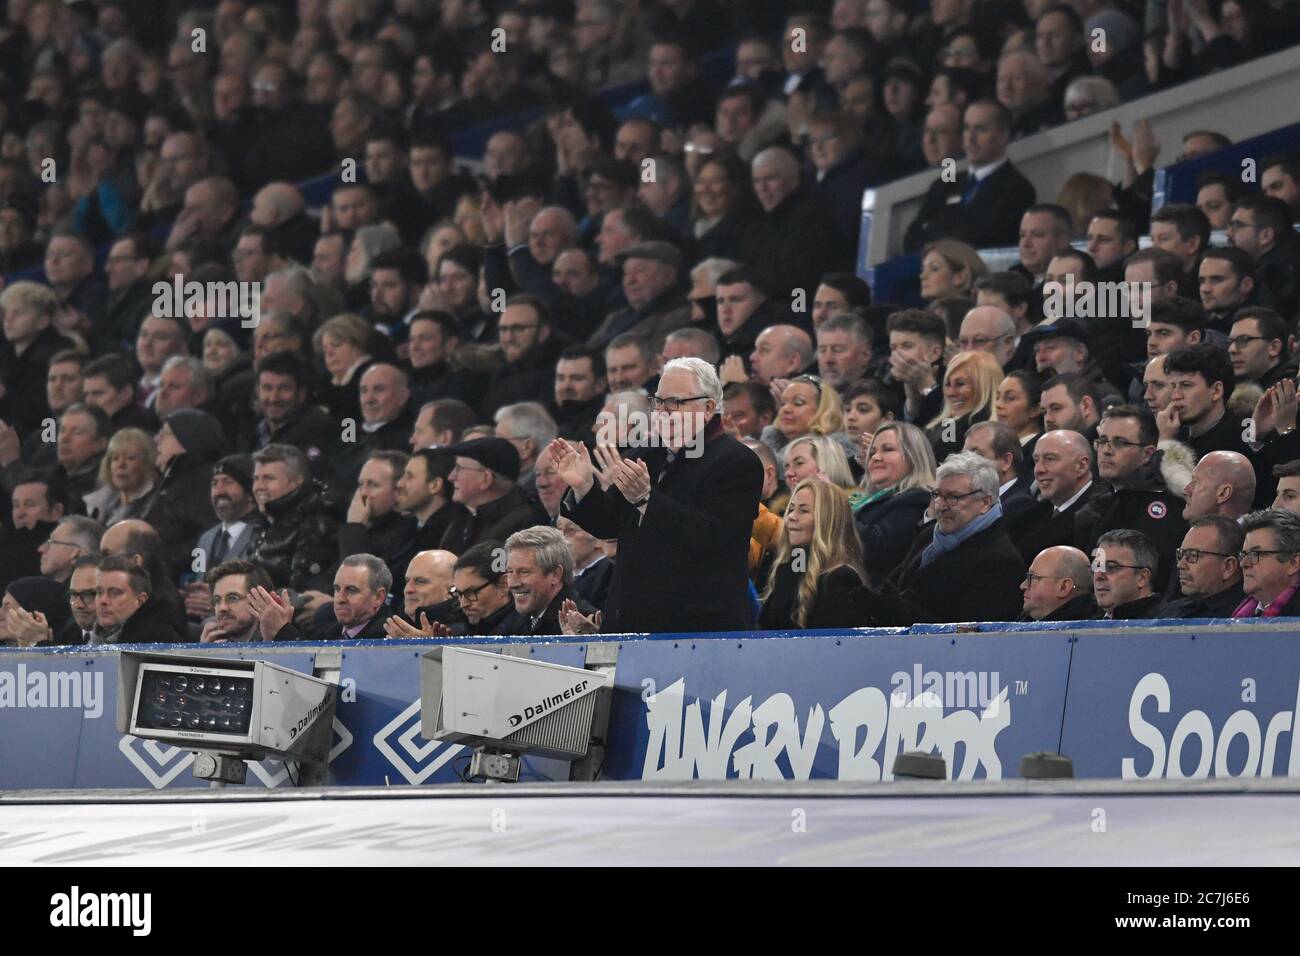 21st January 2020, Goodison Park, Liverpool, England; Premier League, Everton v Newcastle United : Everton Chairman, Bill Kenwright gives a personal standing ovation to the substituted Bernard (not pictured) for his performance on the pitch this evening Stock Photo